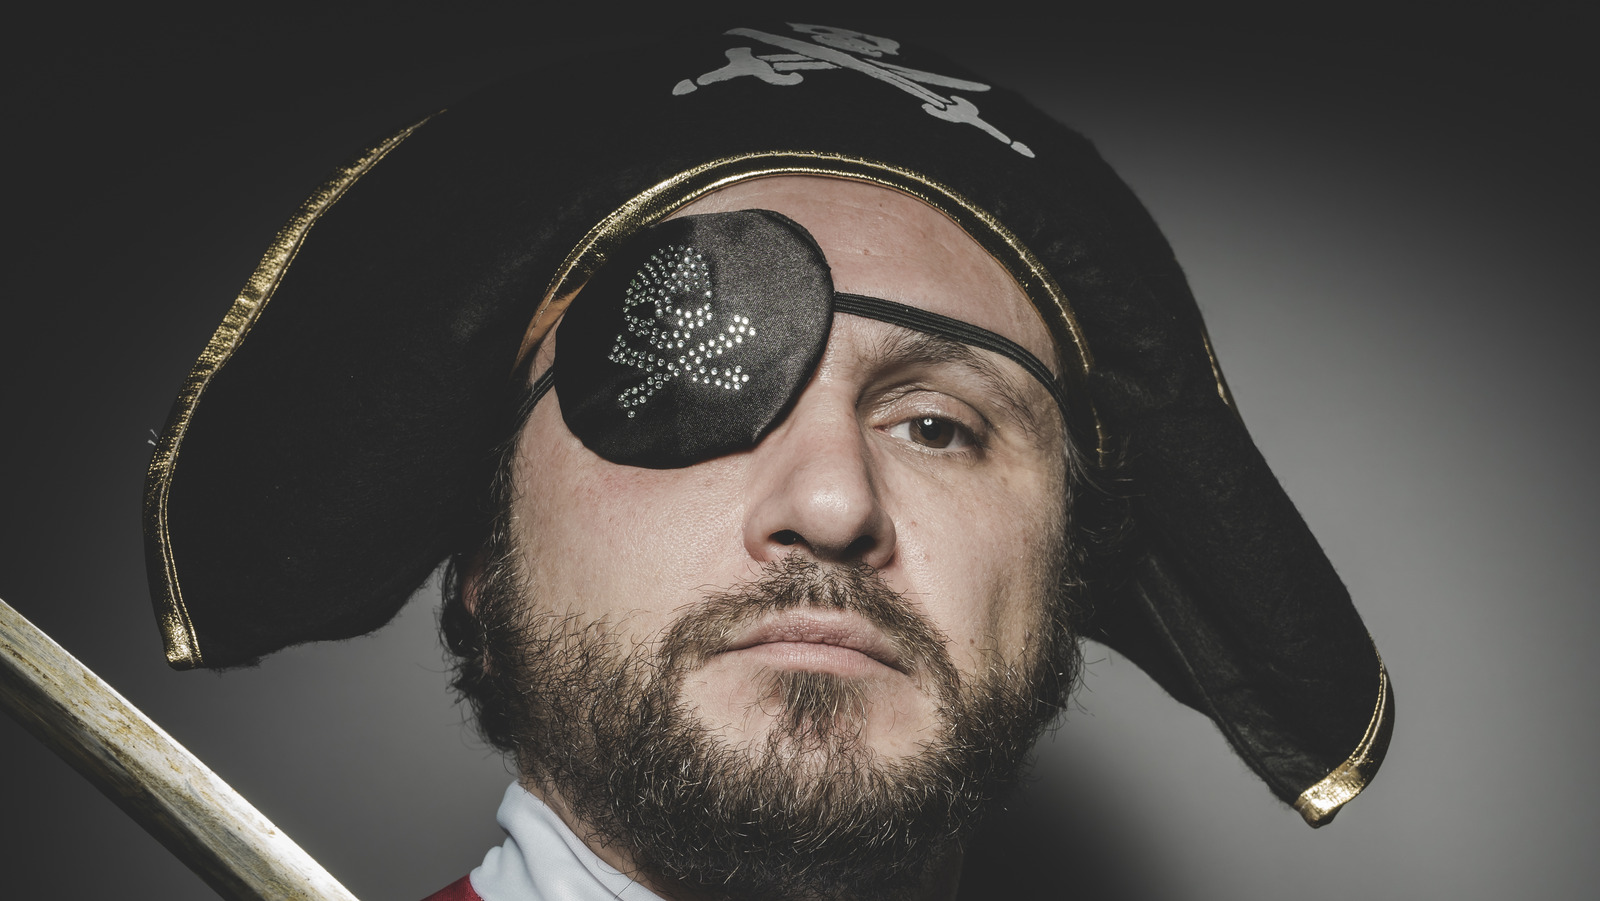 Pirate Eye Patch Glasses With Beard